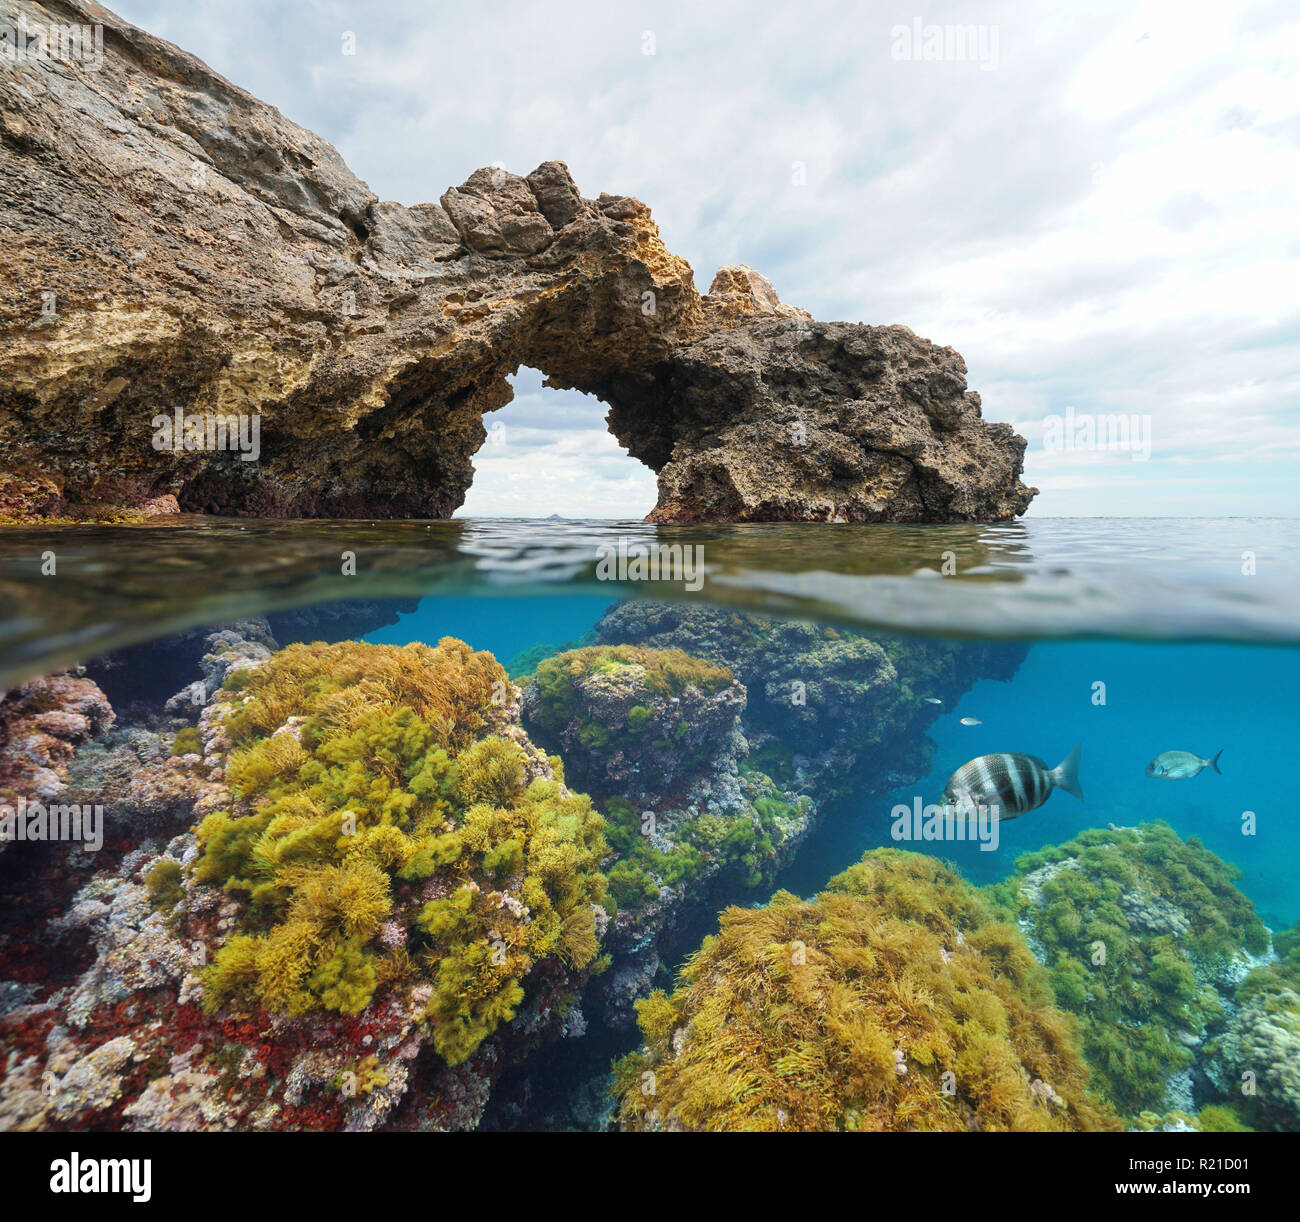 Rock formation natural arch with algae and fish underwater, split view half above and below water surface, Mediterranean sea, Cabo de Palos, Spain Stock Photo